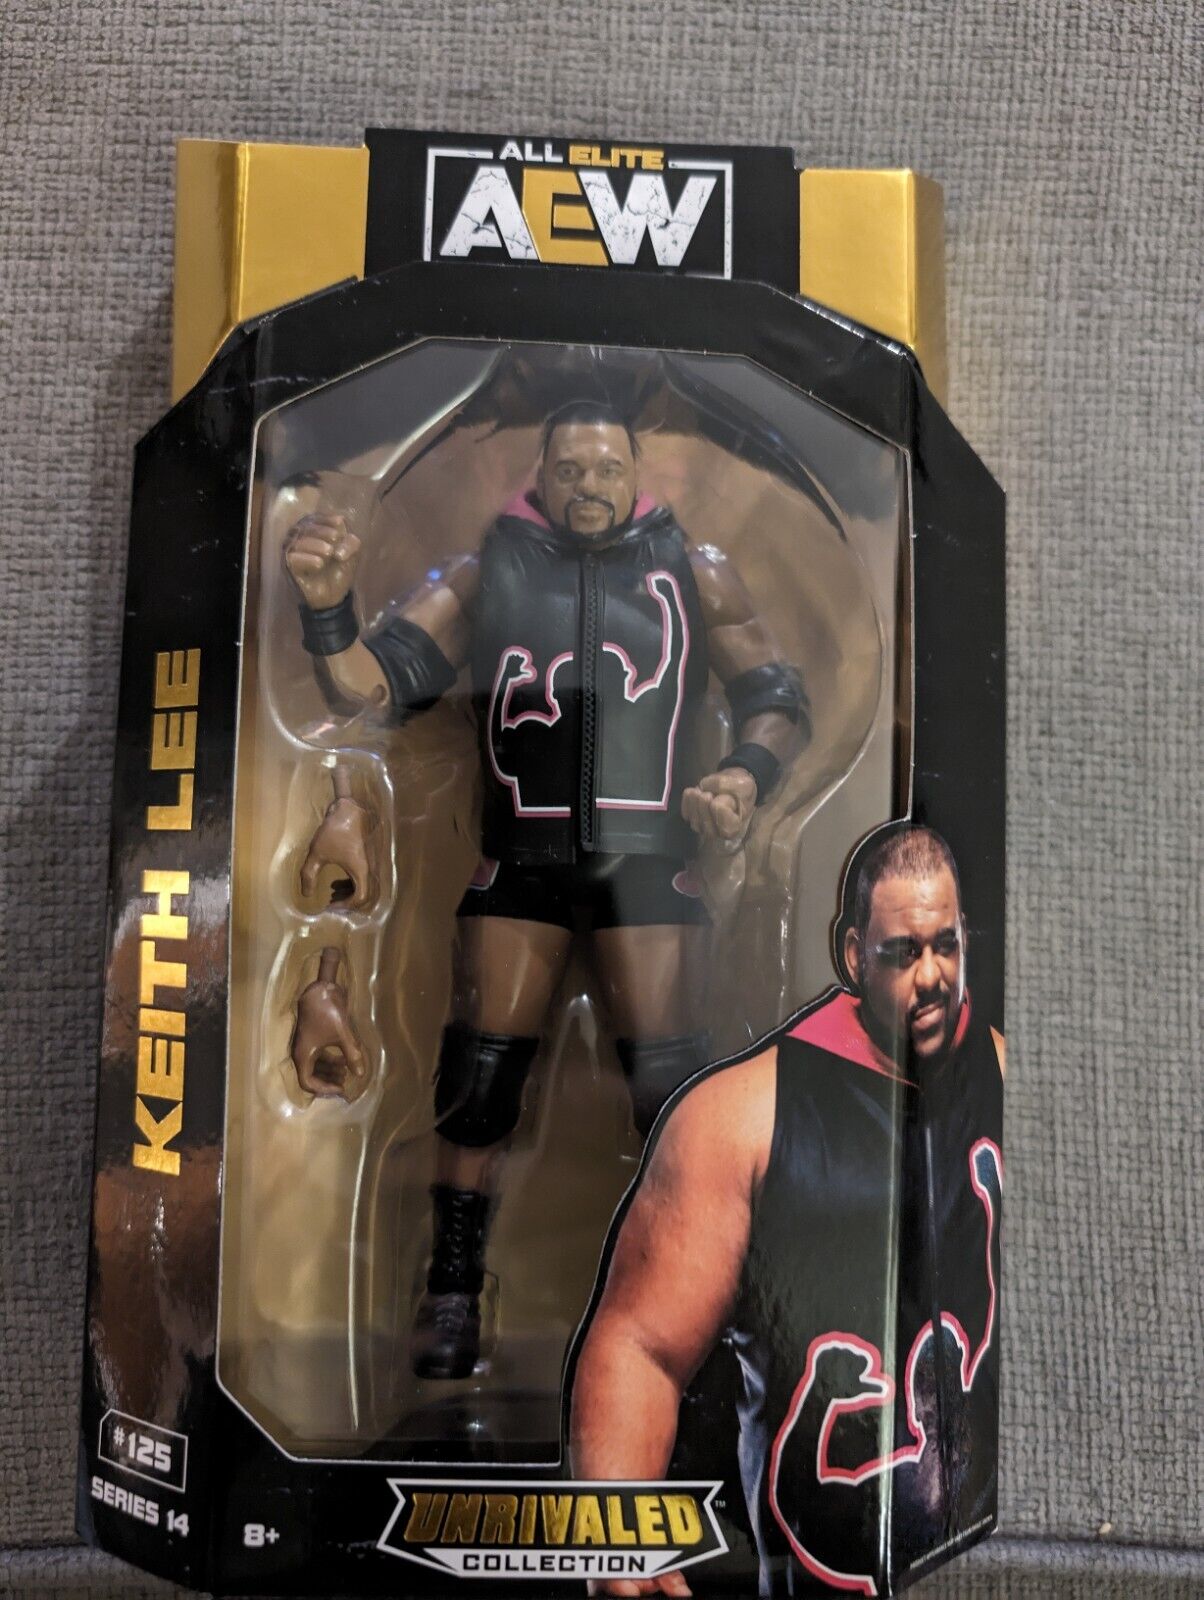 ALL ELITE AEW WRESTLING FIGURE 125 KEITH LEE - UNRIVALED COLLECTION